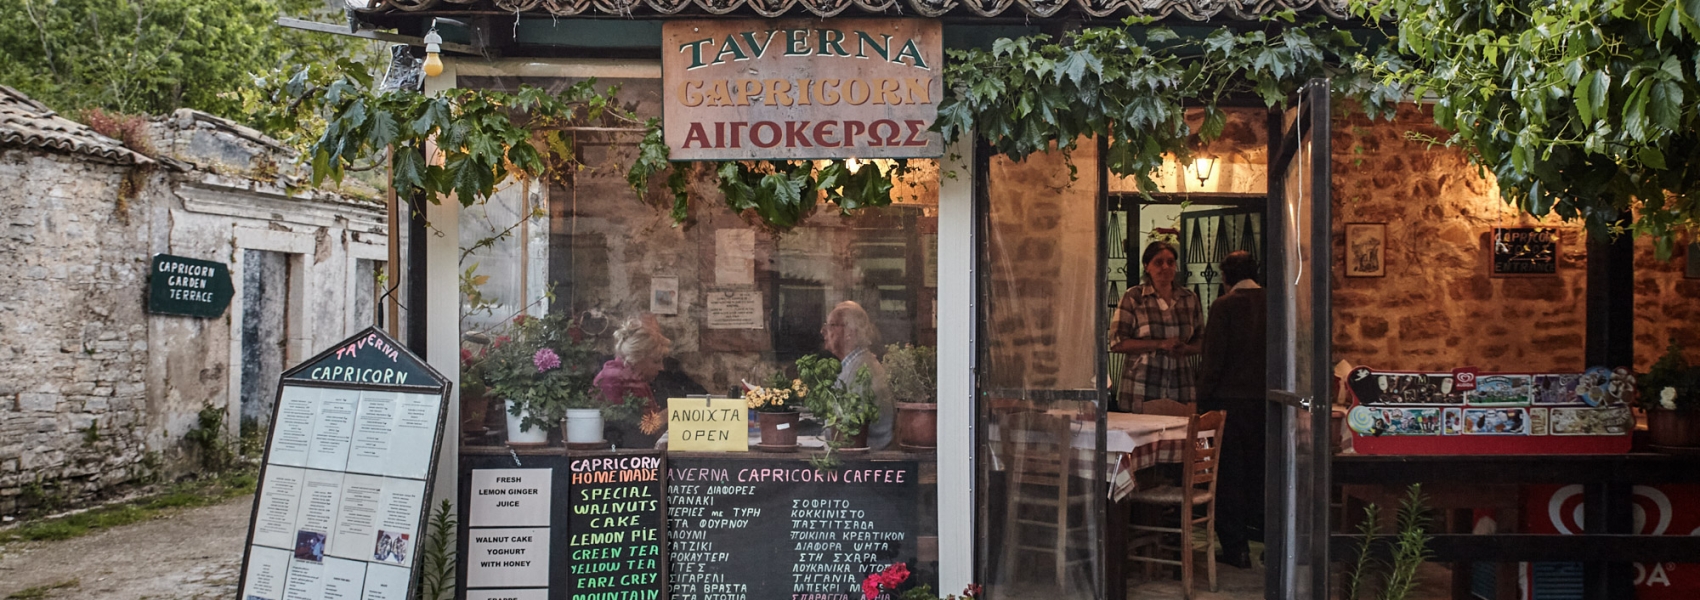 A side of great, chunky overflowing charm | Taverna Capricorn